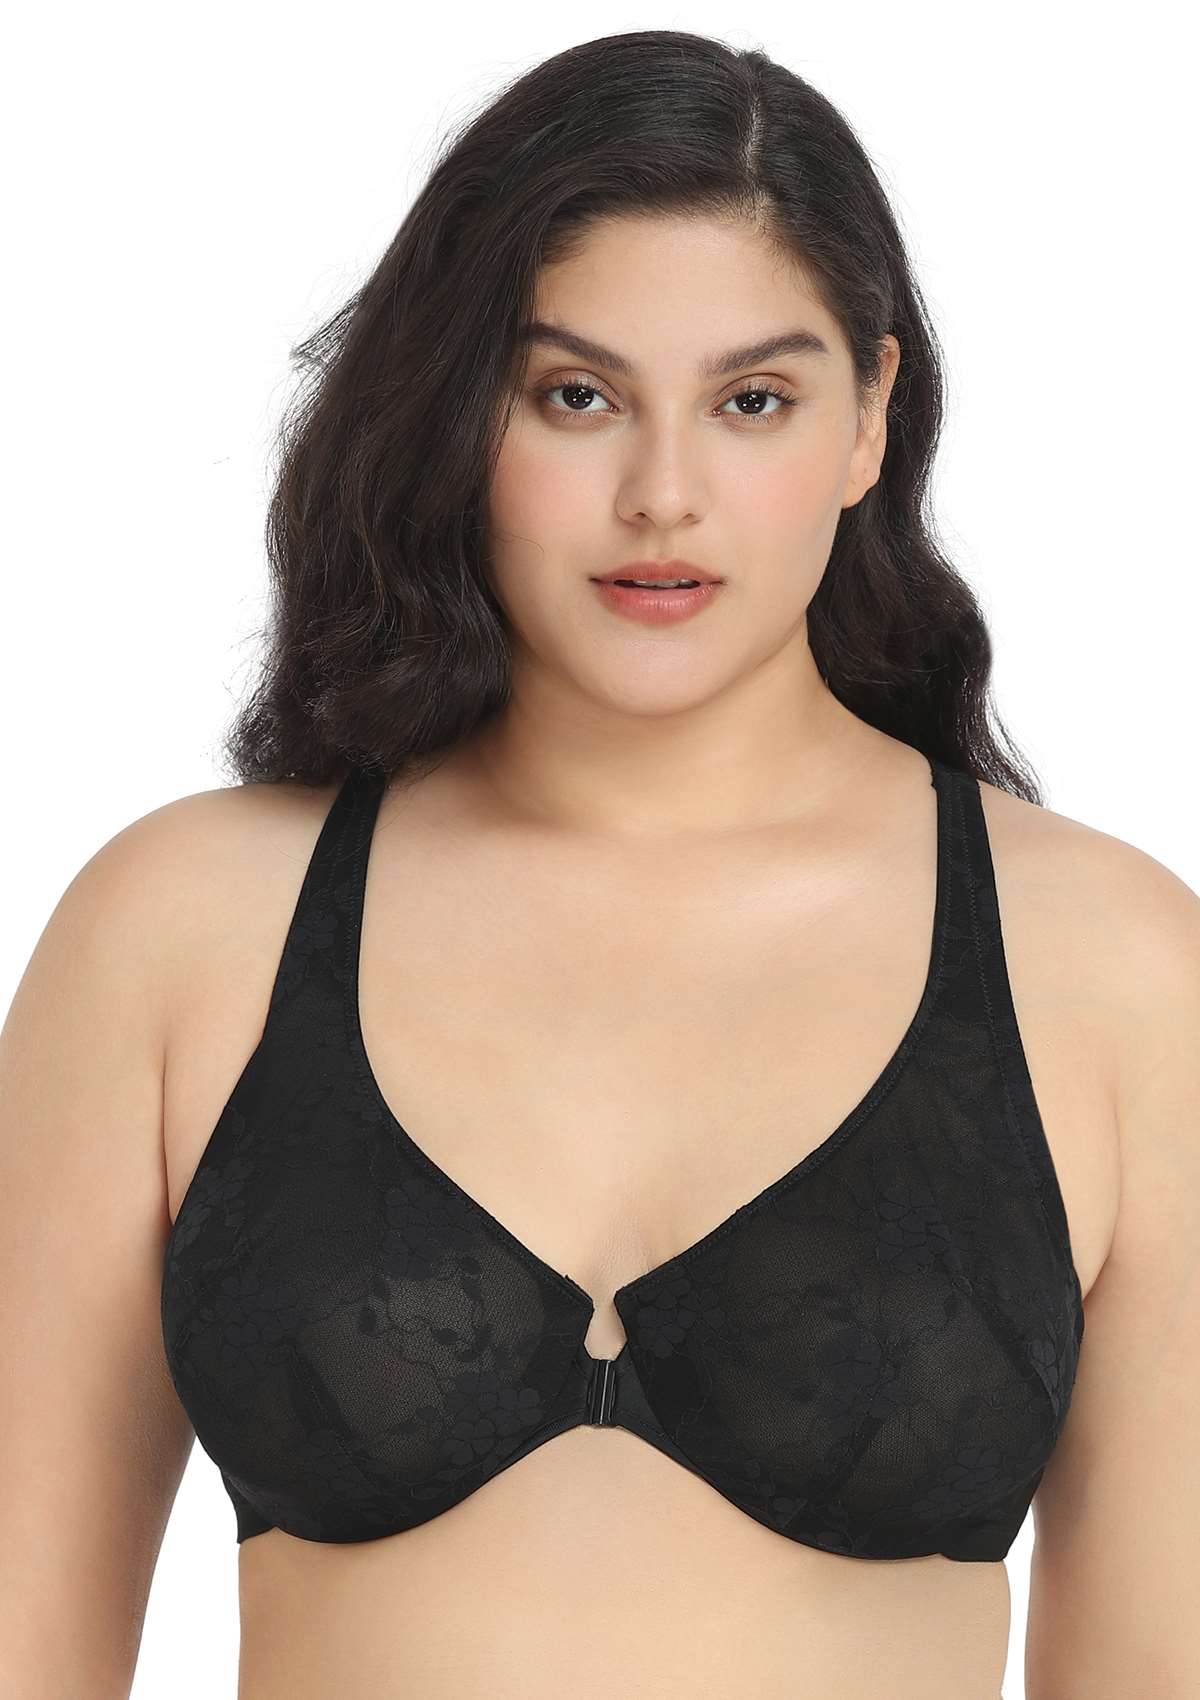 HSIA Spring Romance Front-Close Floral Lace Unlined Full Coverage Bra - Black / 34 / C